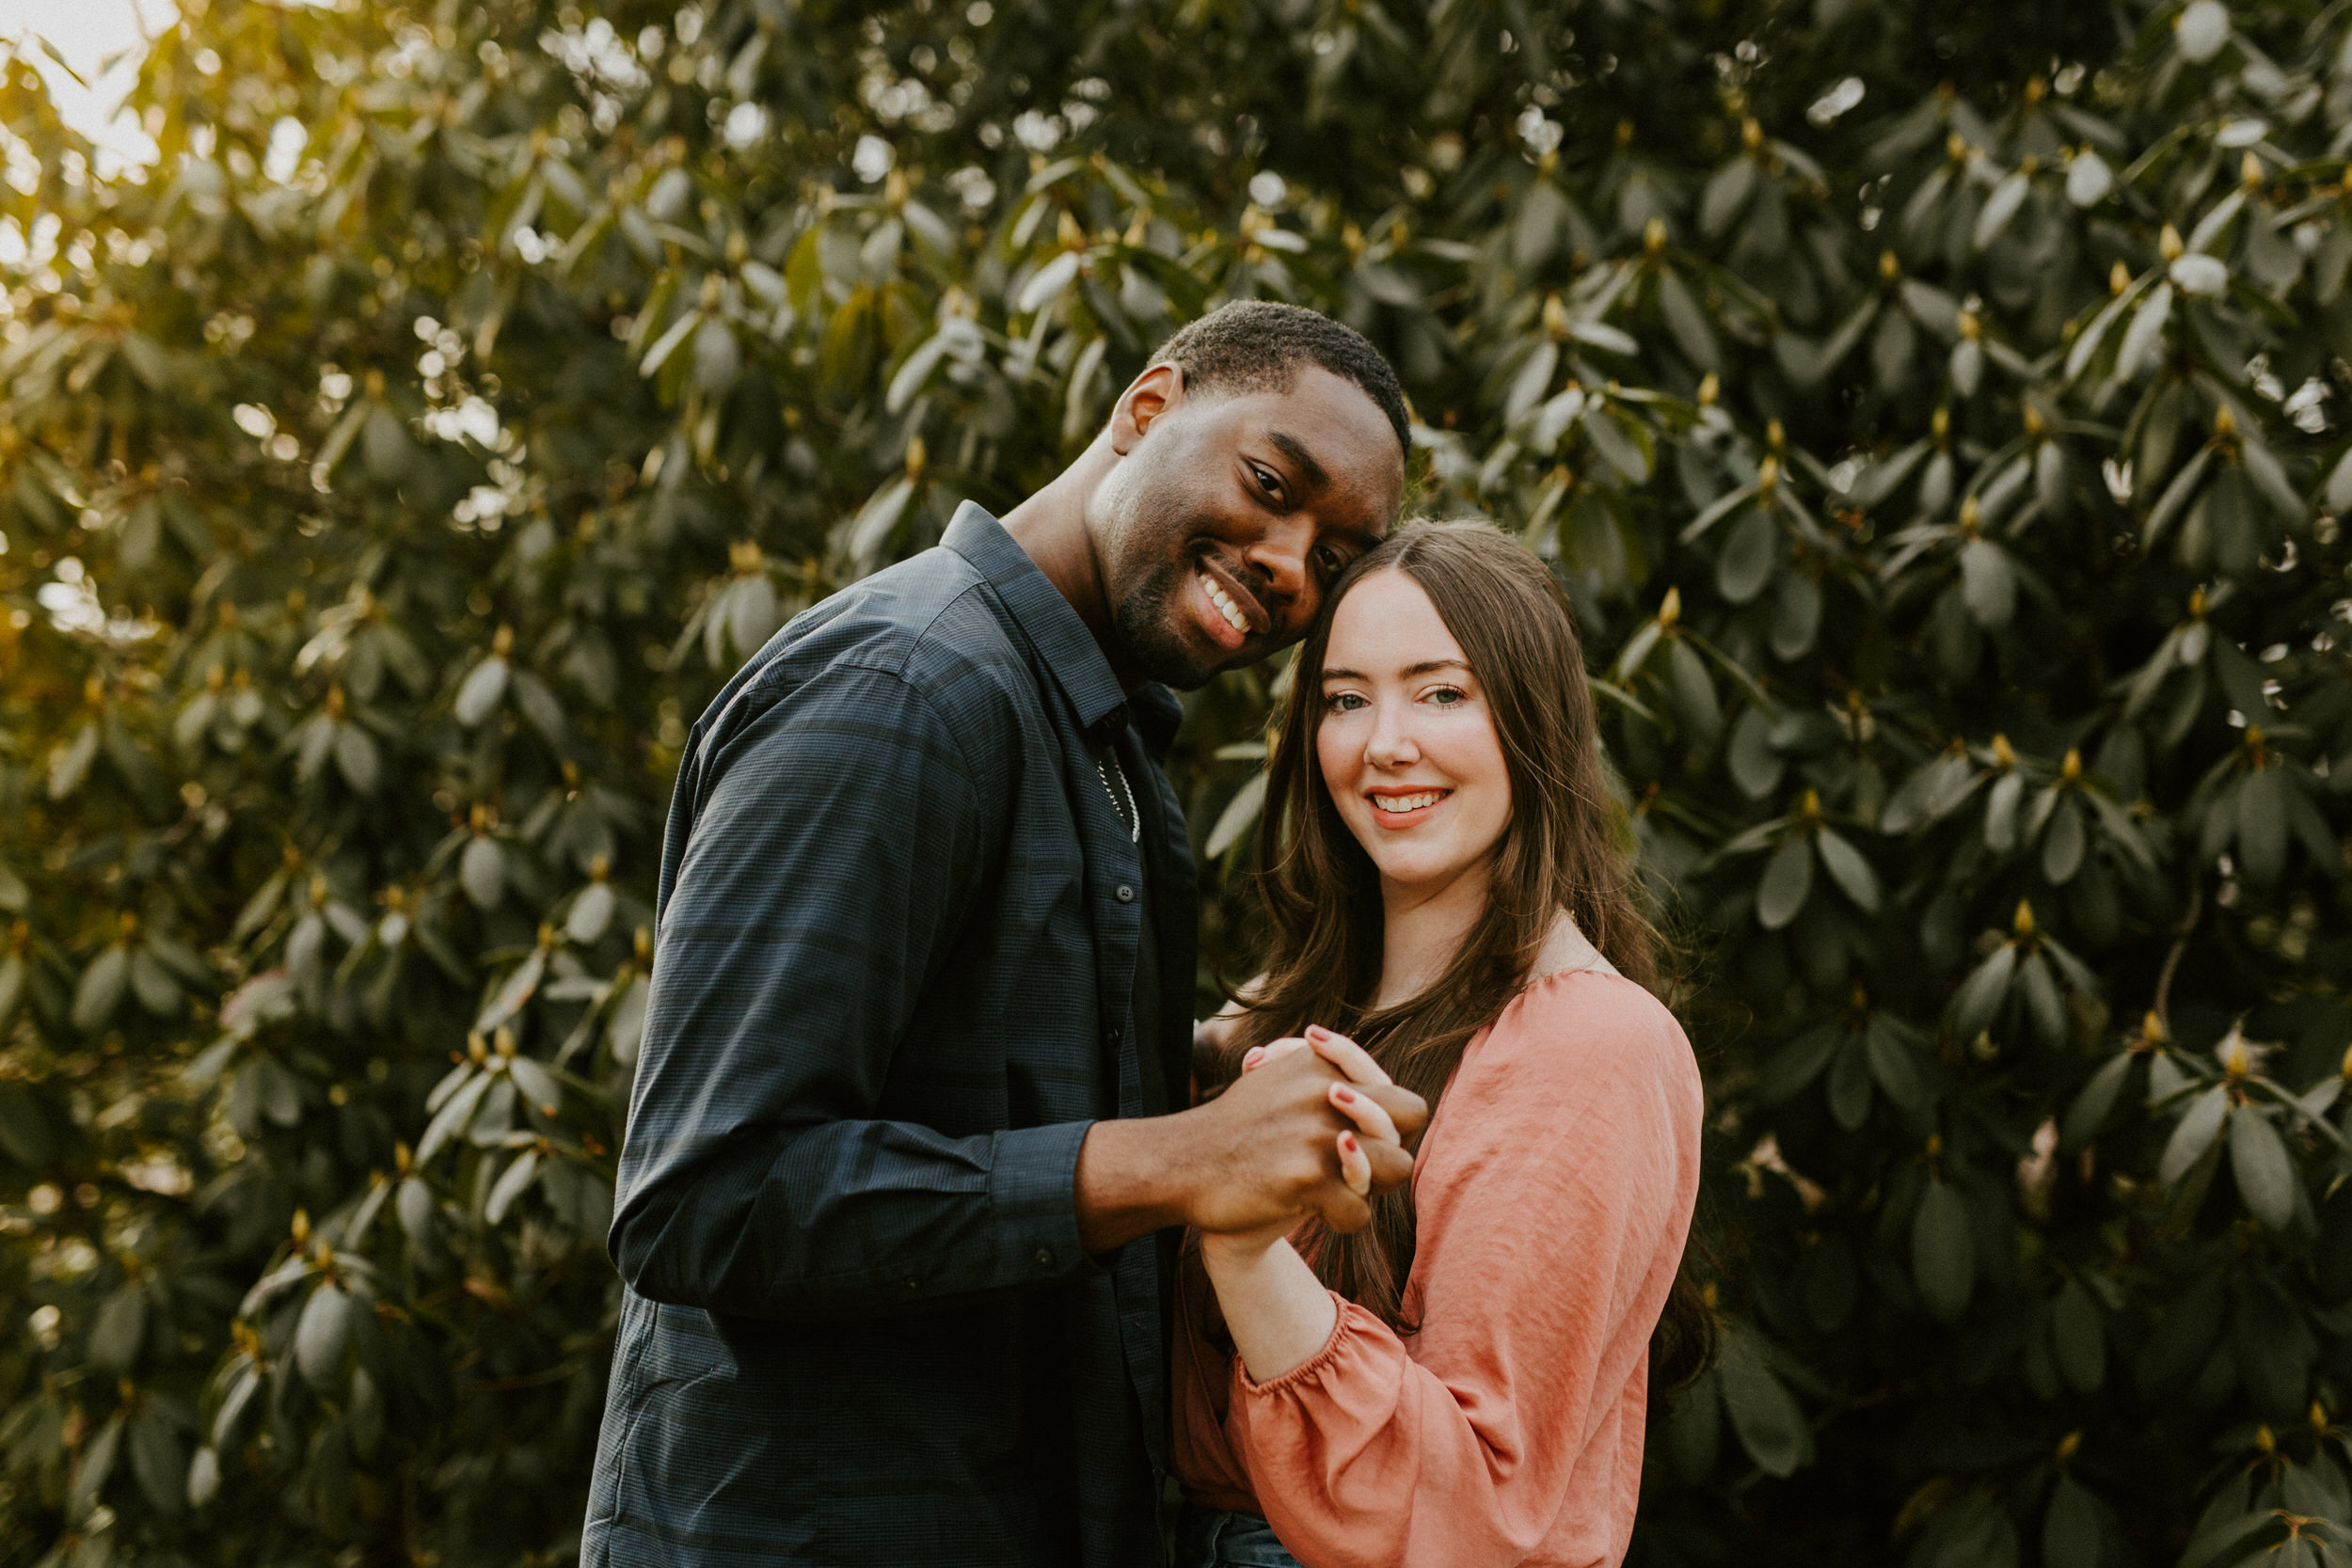 spring engagement session locations in pittsburgh